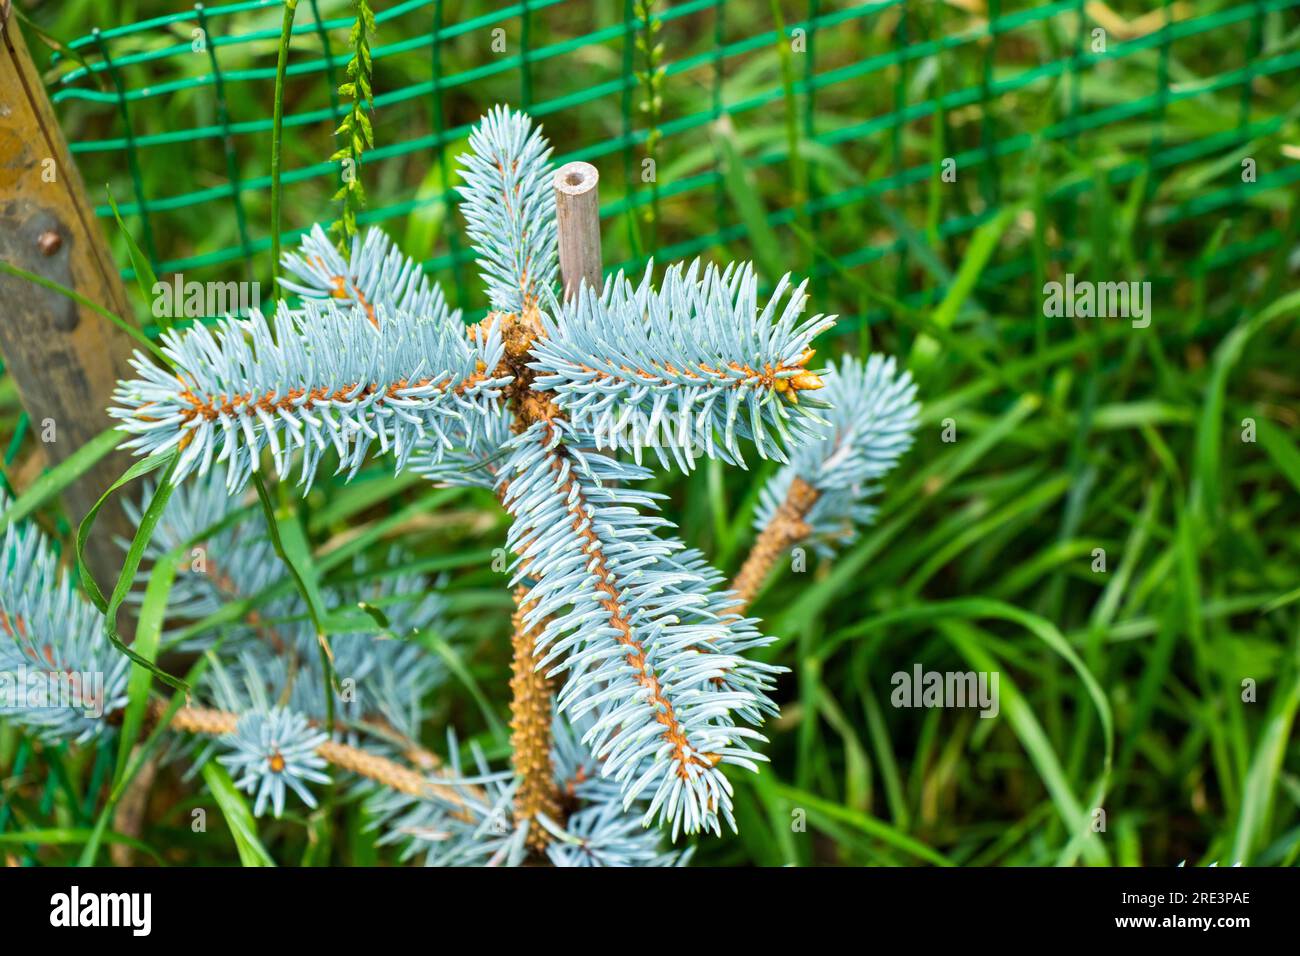 Abies procera Glauca, gray and blue pine Stock Photo